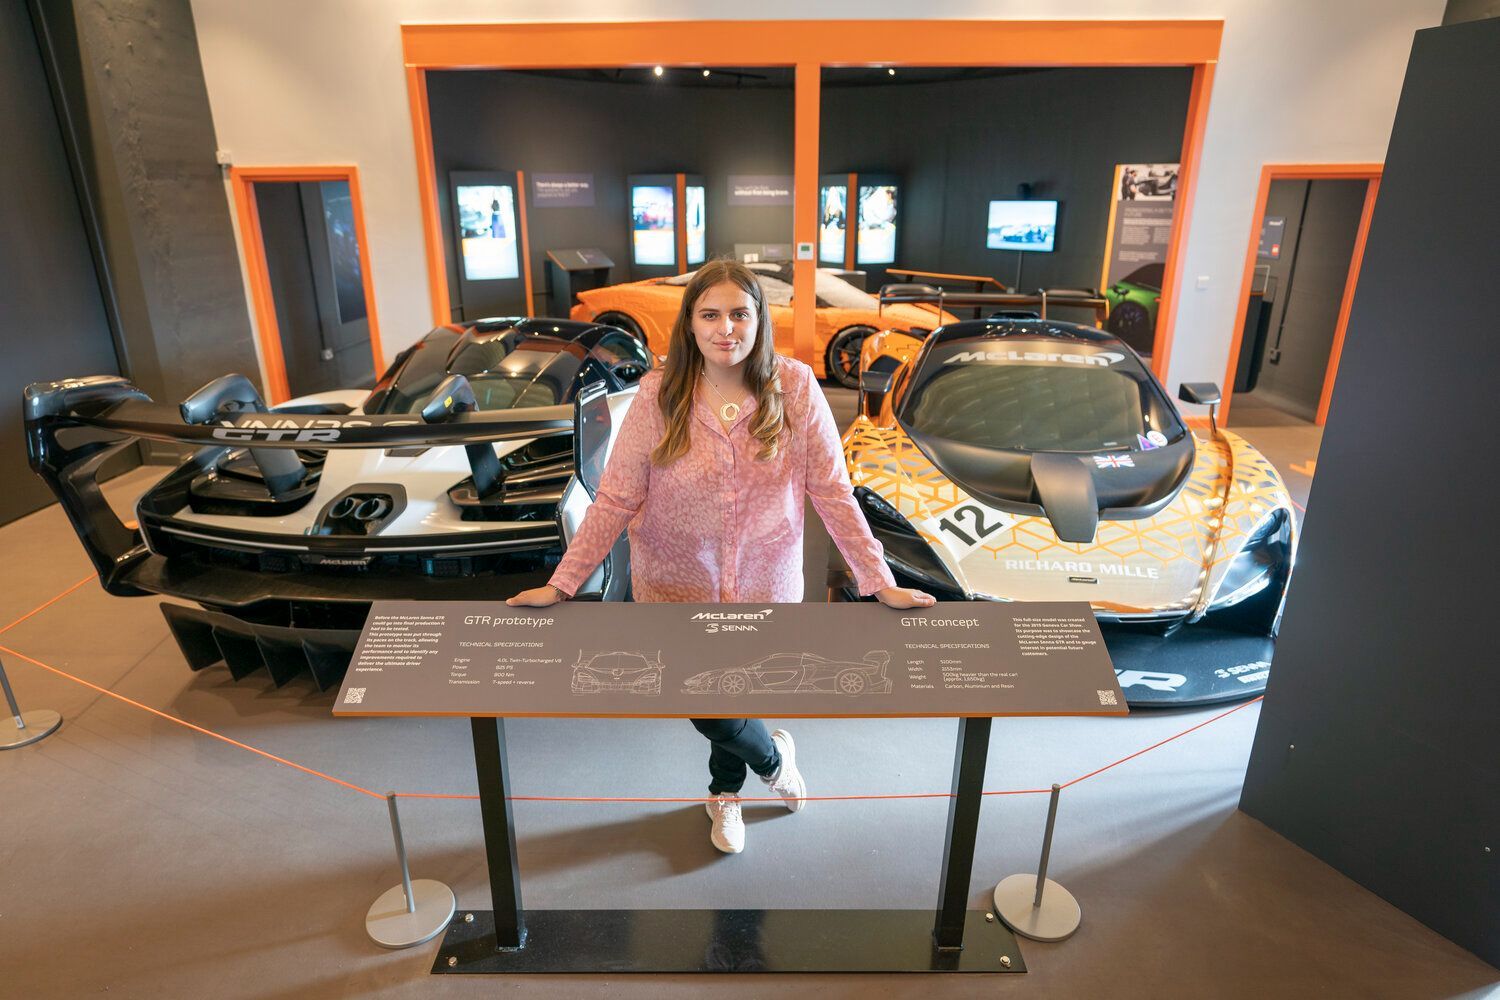 Yound woman in pink top stand inside the exhibition, with the white McLaren Senna GTR Prototype and Orange and silver Concept cars behind